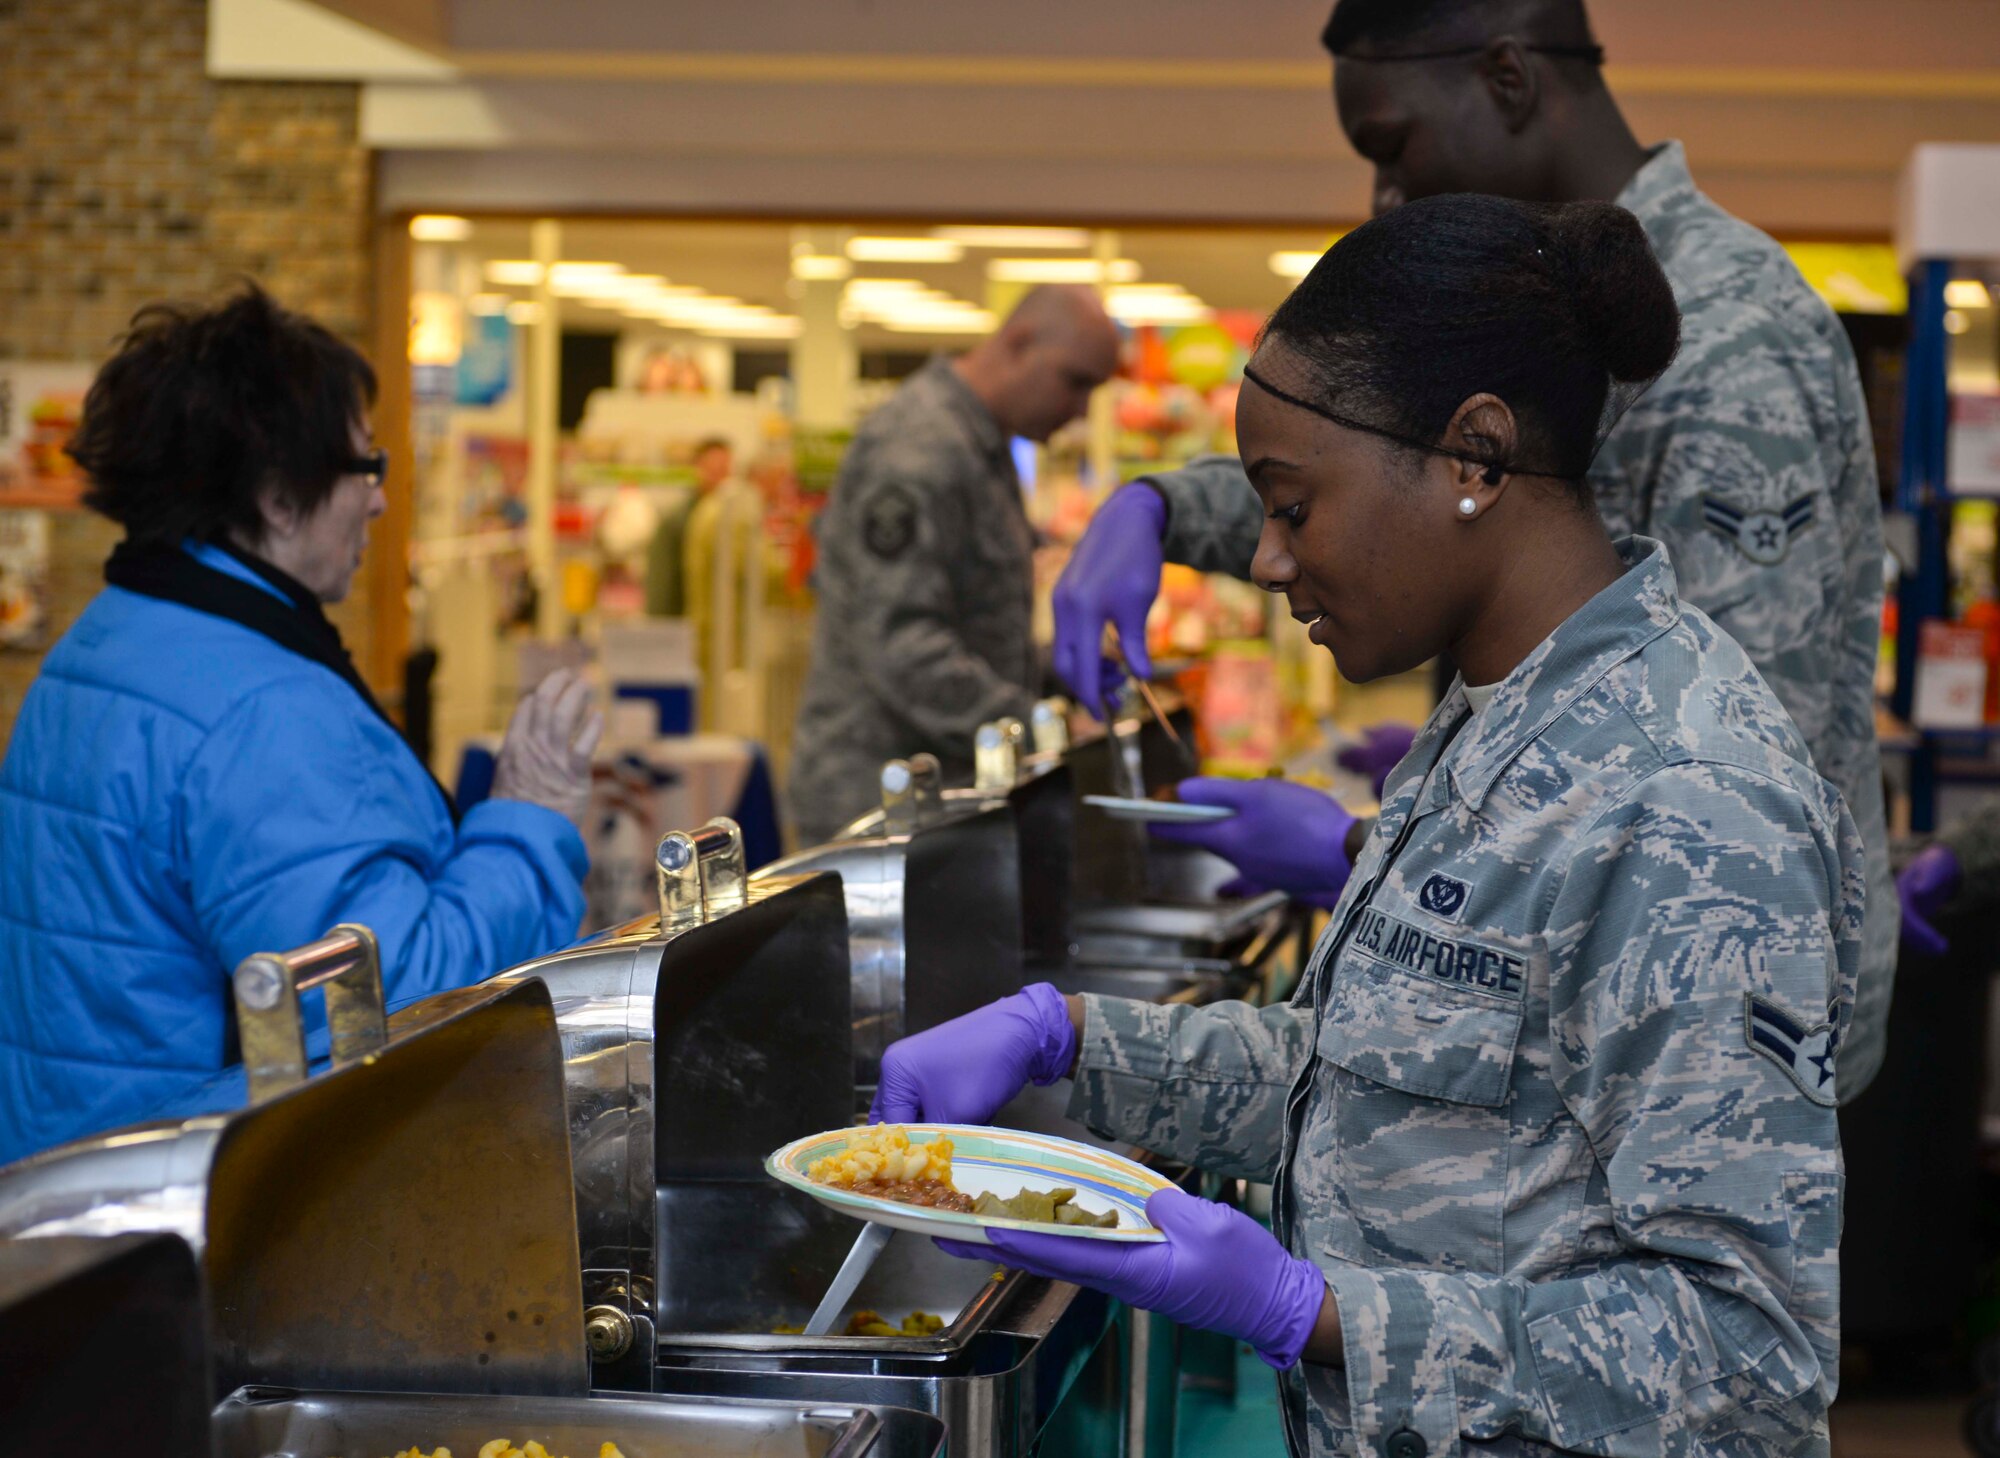 Airman 1st Class Janay Jones, 28th Civil Engineer Squadron engineer technician, serves food to the base community during the Black History Month luncheon at Ellsworth Air Force Base, S.D., Feb. 24, 2016. The luncheon had more than 10 dishes of African American cuisine with more than 80 people in attendance. (U.S. Air Force photo by Airman Sadie Colbert/Released)